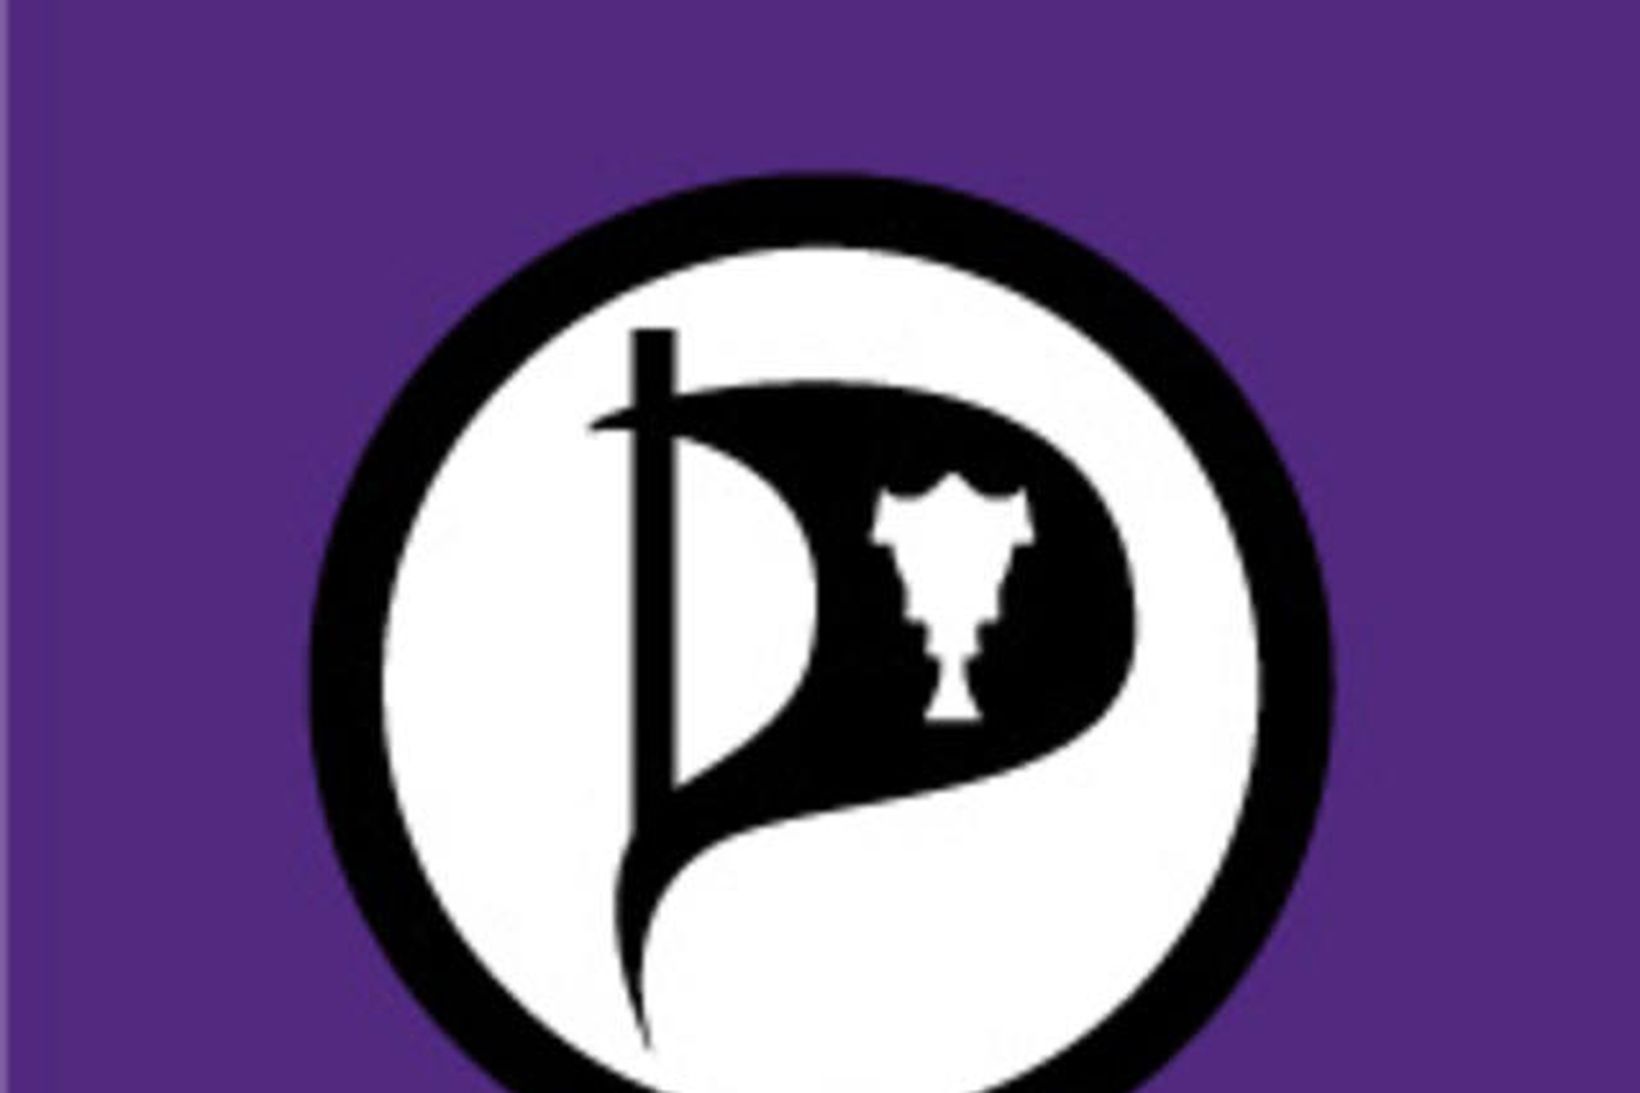 The Icelandic Pirate Party logo.